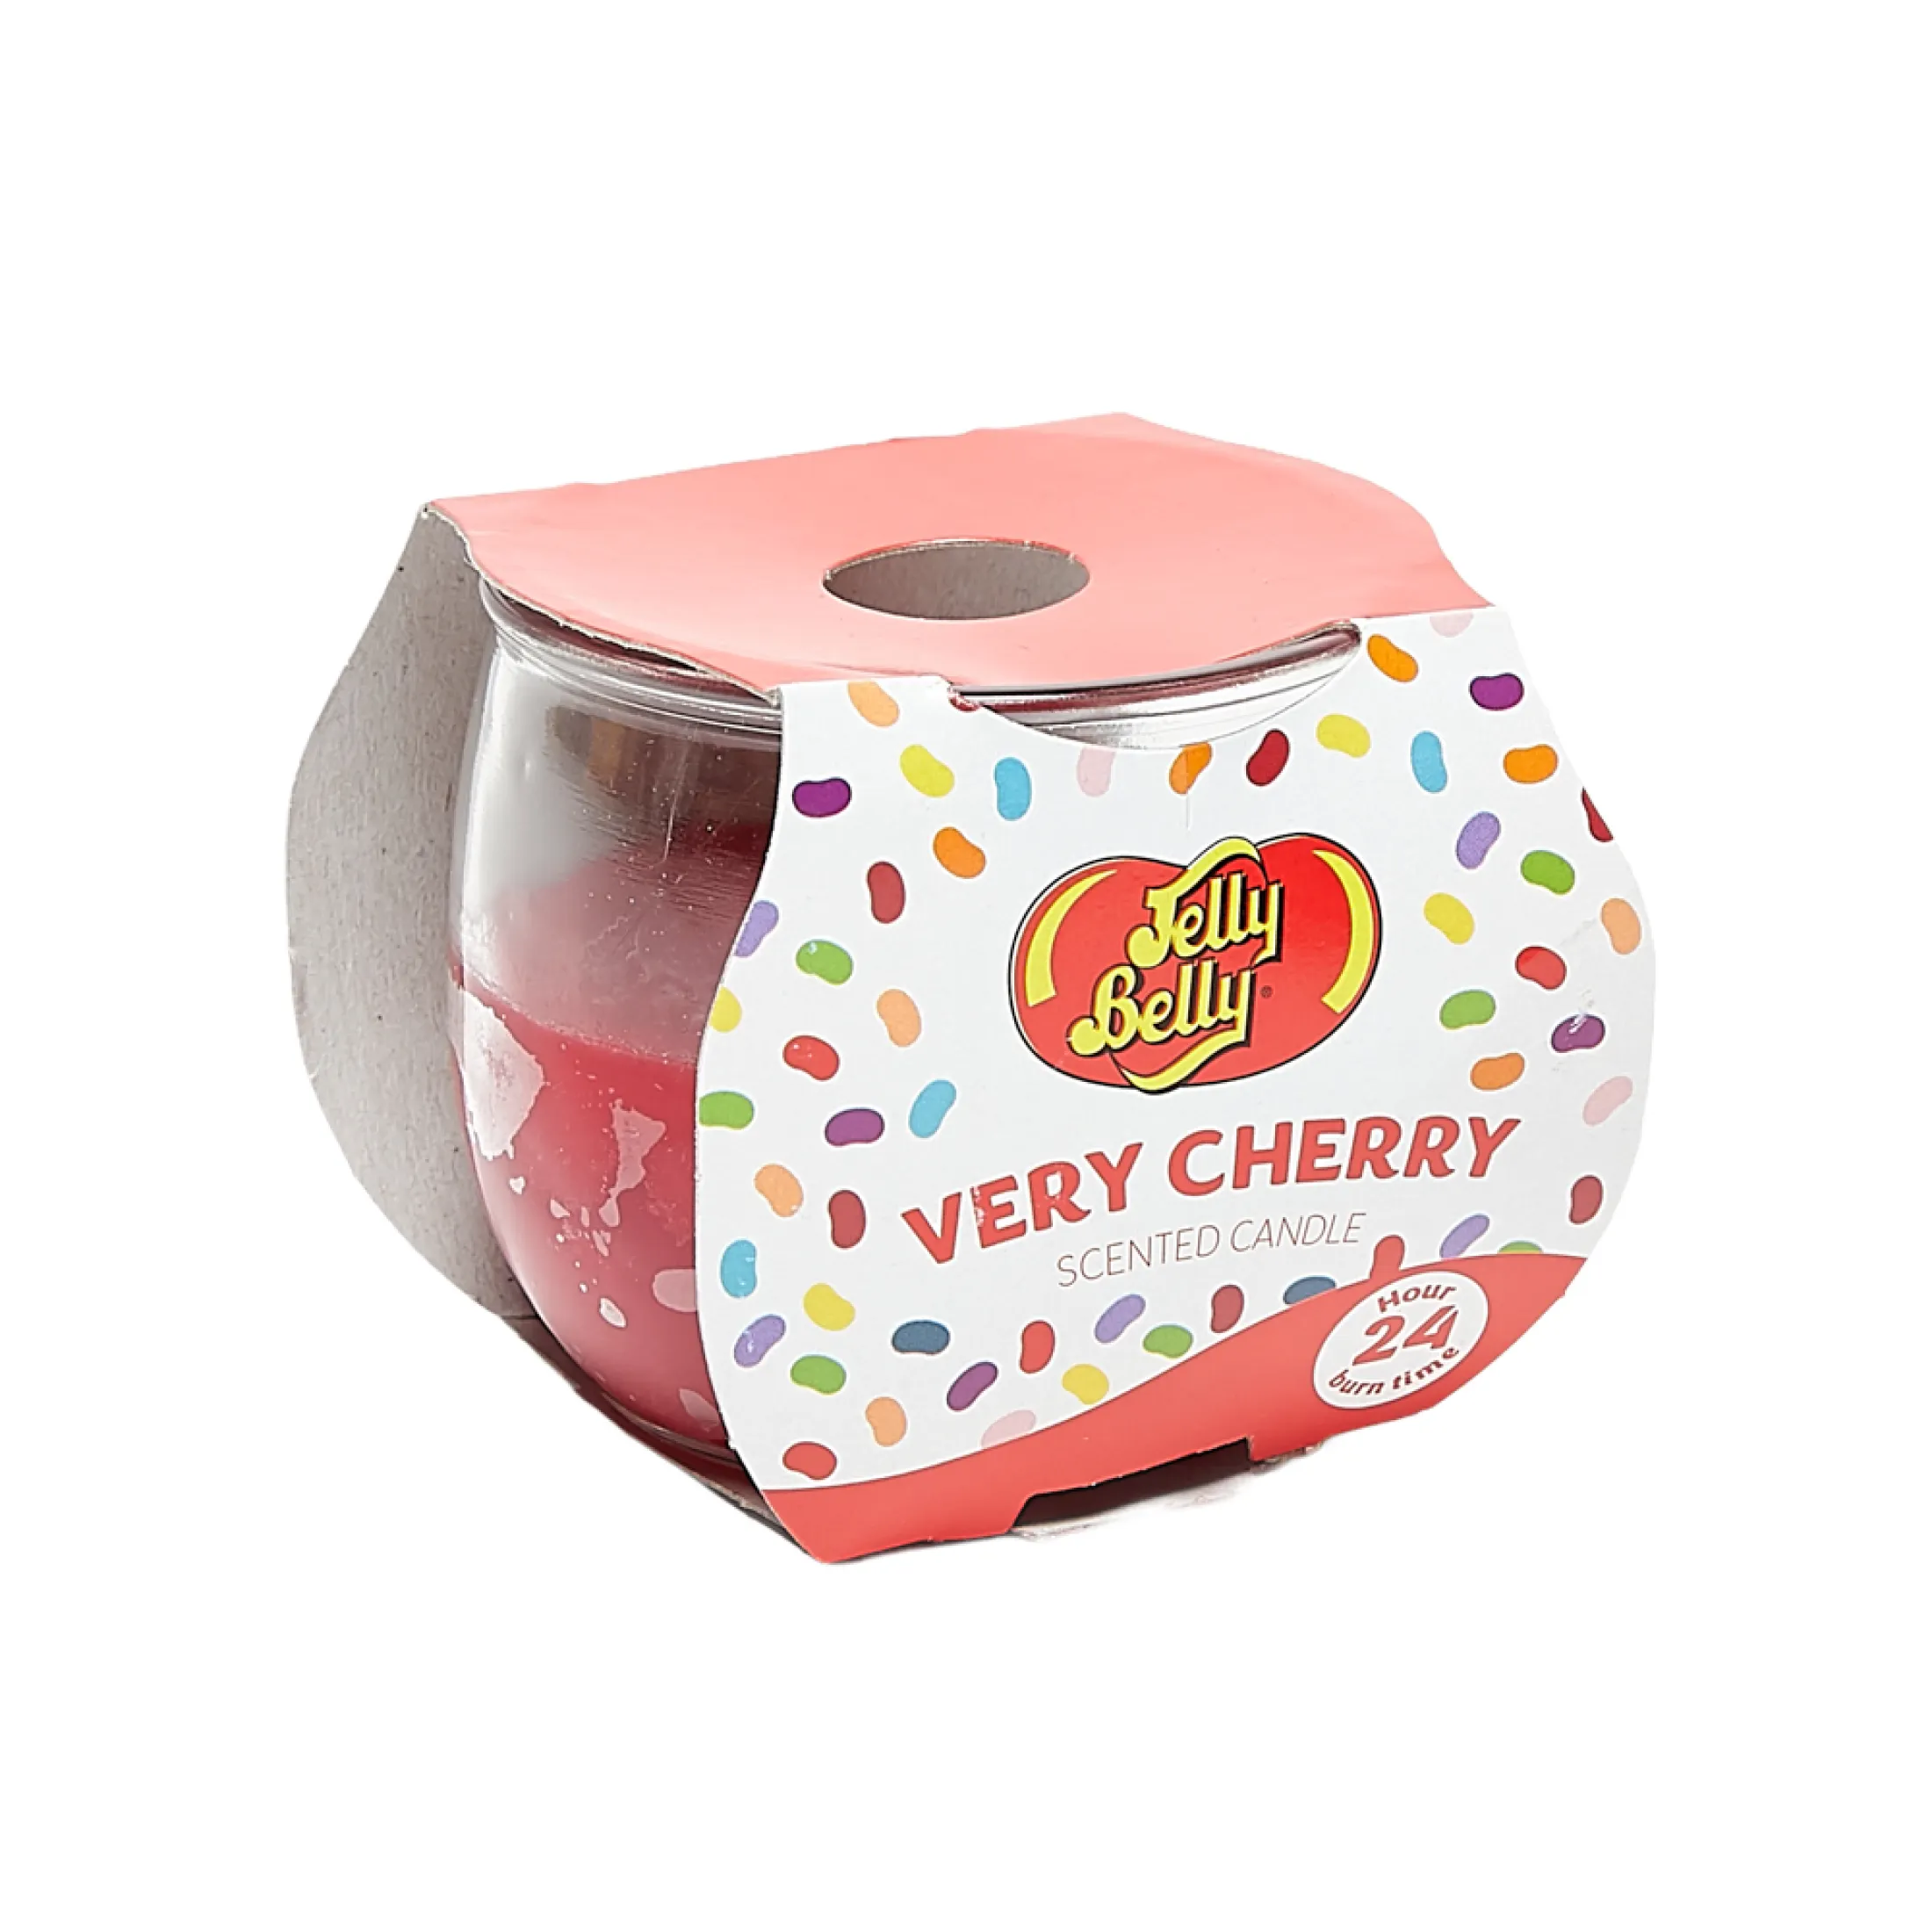 4 x JELLY BELLY SCENTED CANDLE VERY CHERRY HOME FRAGRANCE SCENT ROOM DECOR 85G 